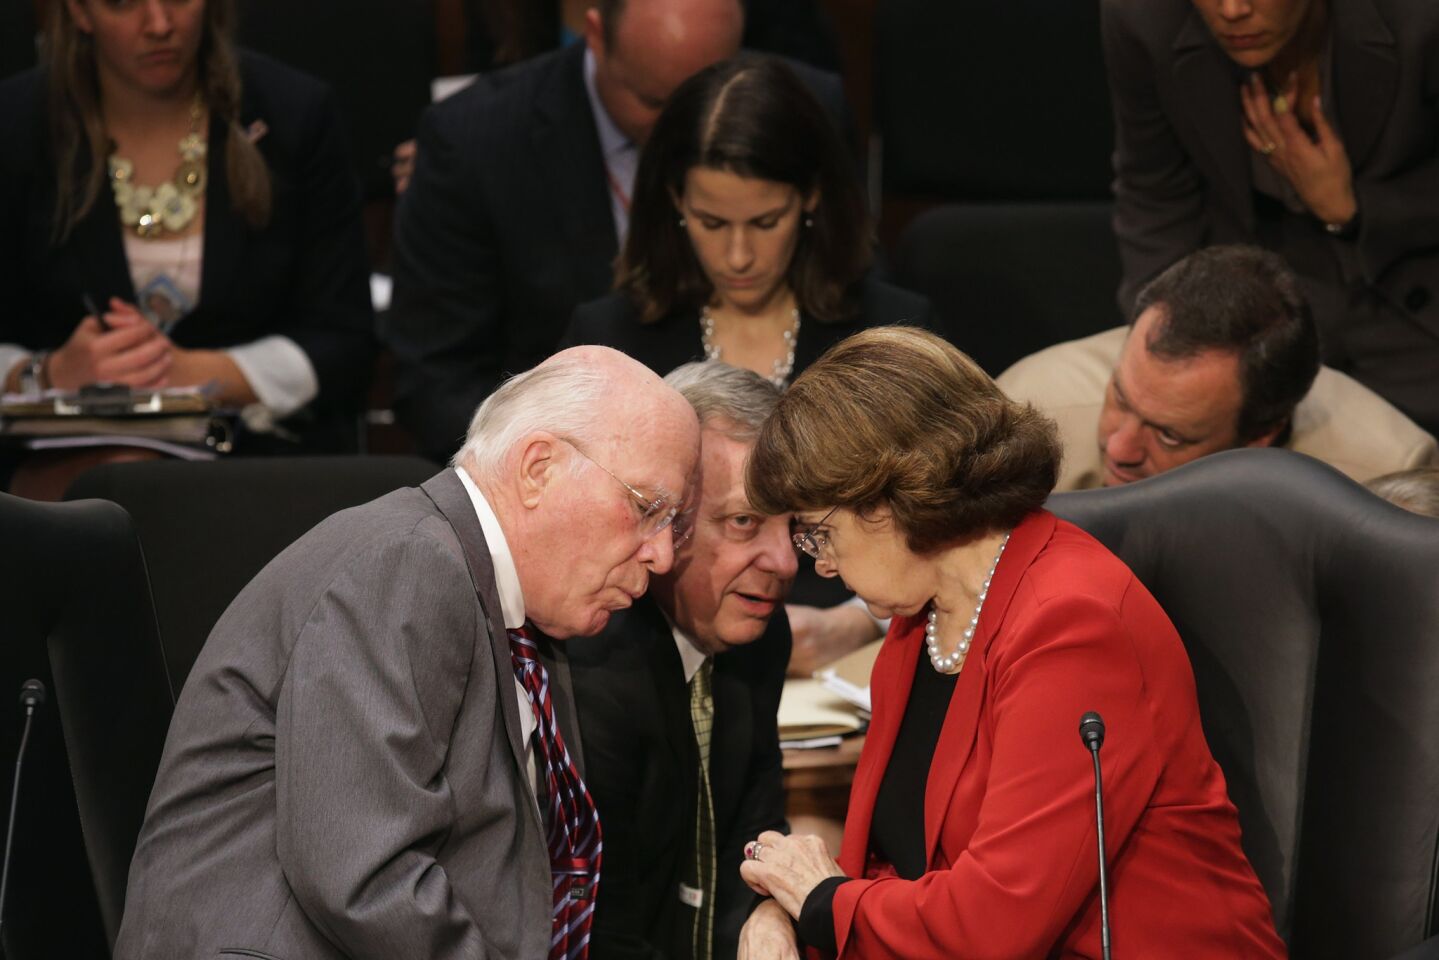 Senate Judiciary Committee Chairman Patrick Leahy (D-Vt.), from left, Sen. Richard Durbin (D-Ill.) and Sen. Dianne Feinstein (D-Calif.) discuss negotiations with Republicans during a markup session for the immigration reform legislation on Capitol Hill.